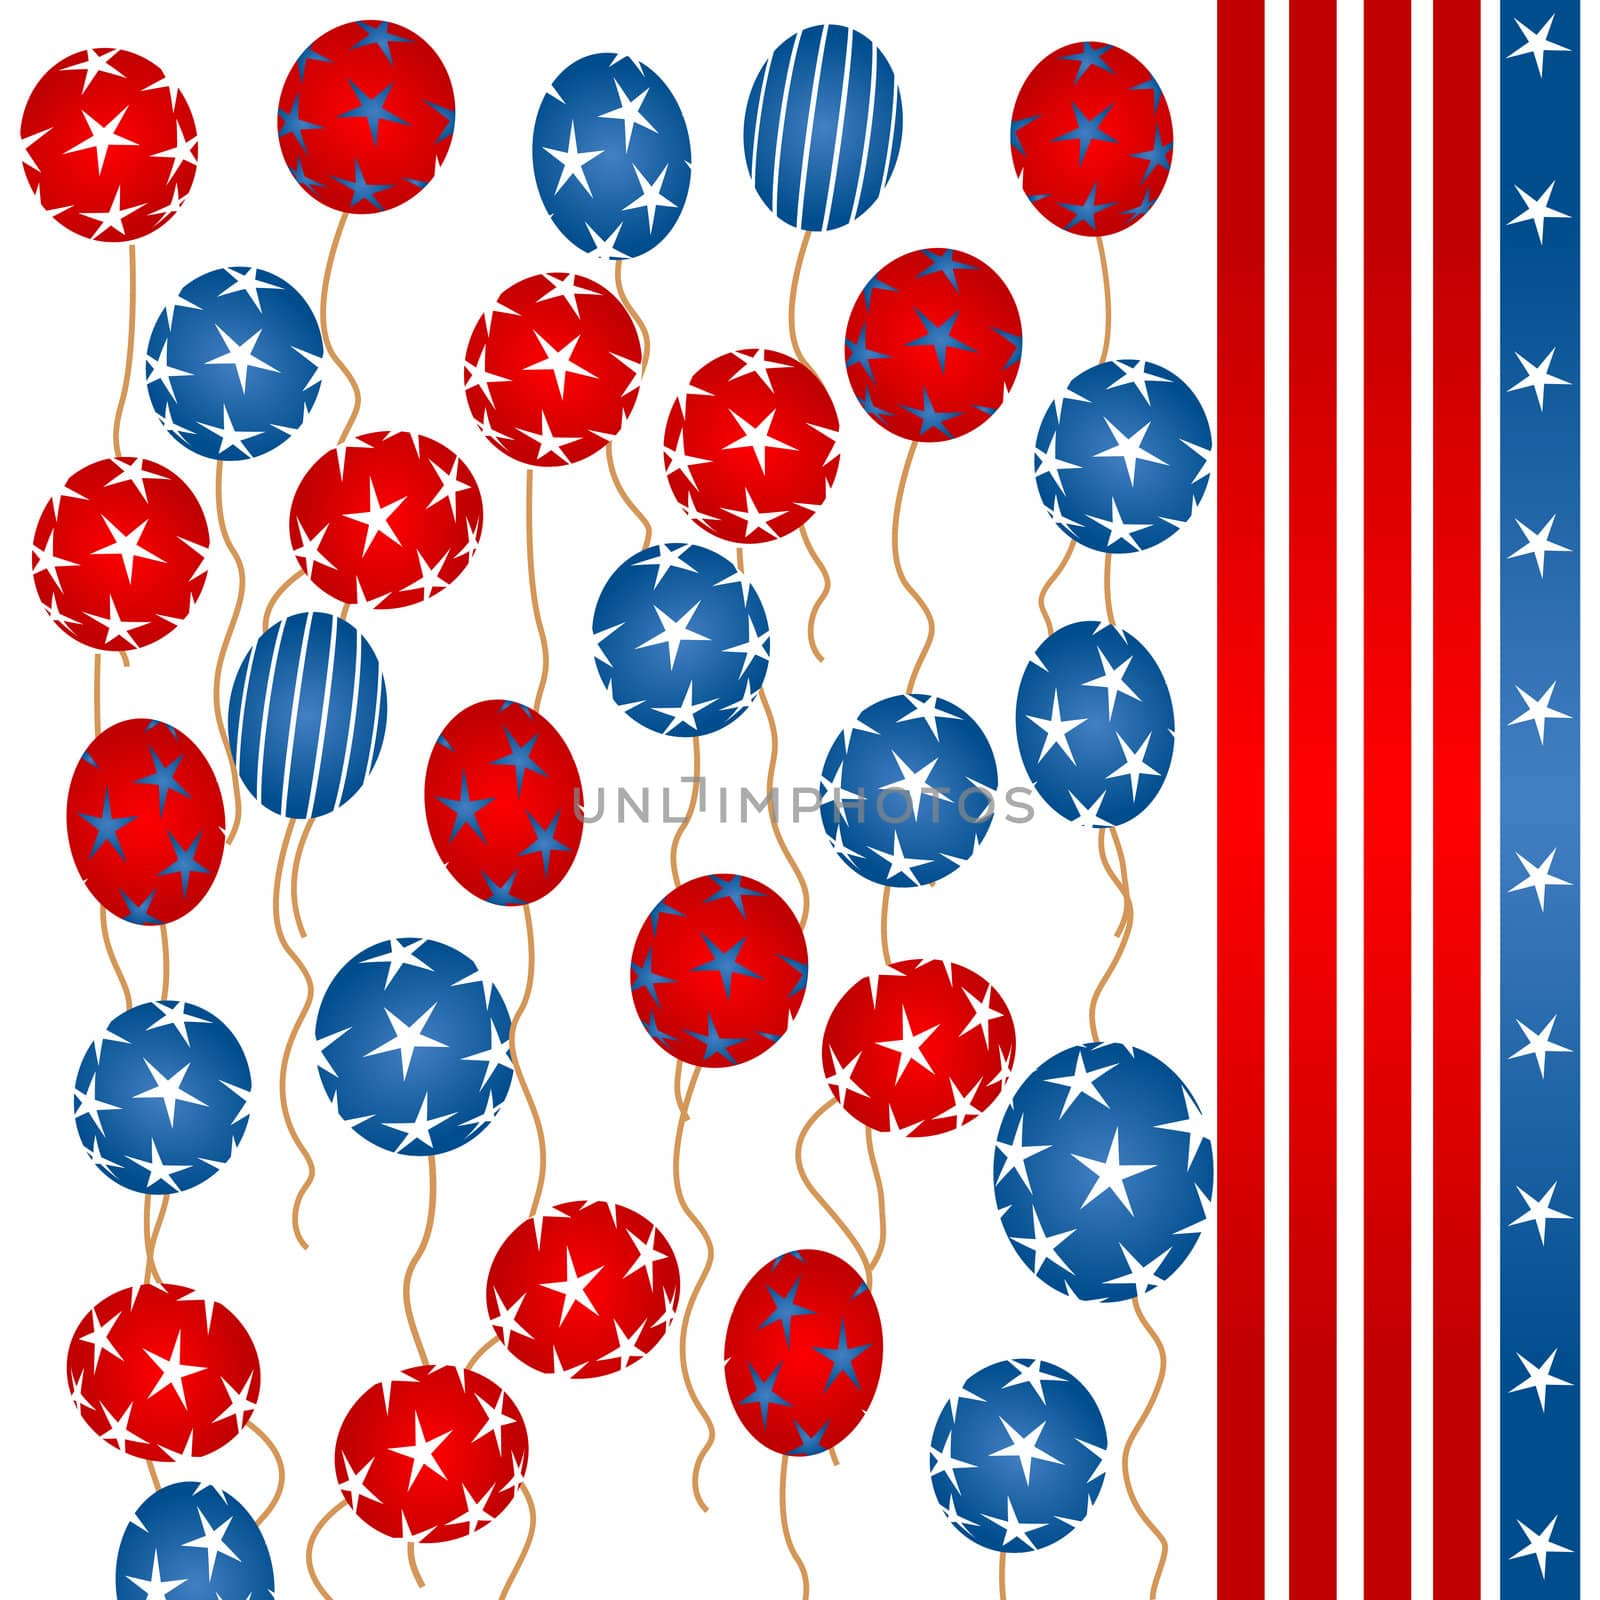 Background illustration with stars and stripes on helium balloons